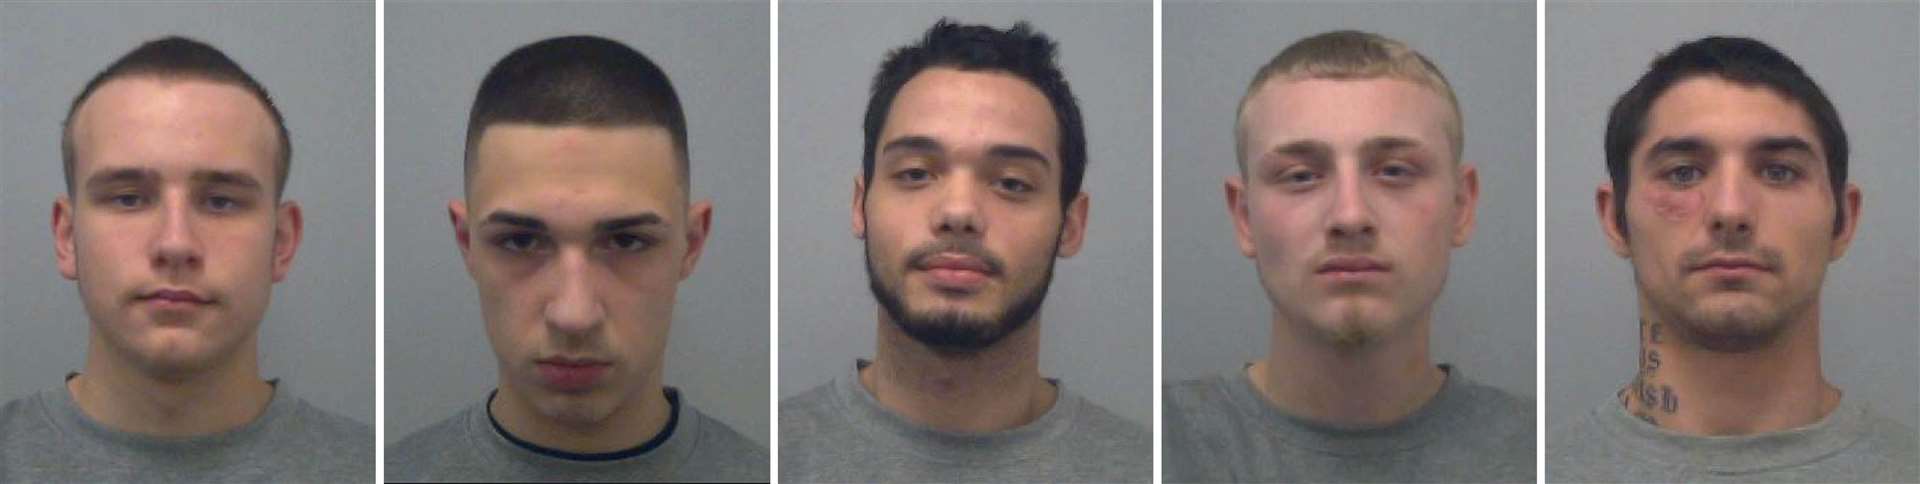 Jamie Chandler, Ben Potter, Clayton Barker, Charlie Chandler and Earl Bevans were sentenced for the murders on Wednesday (Thames Valley Police/PA)